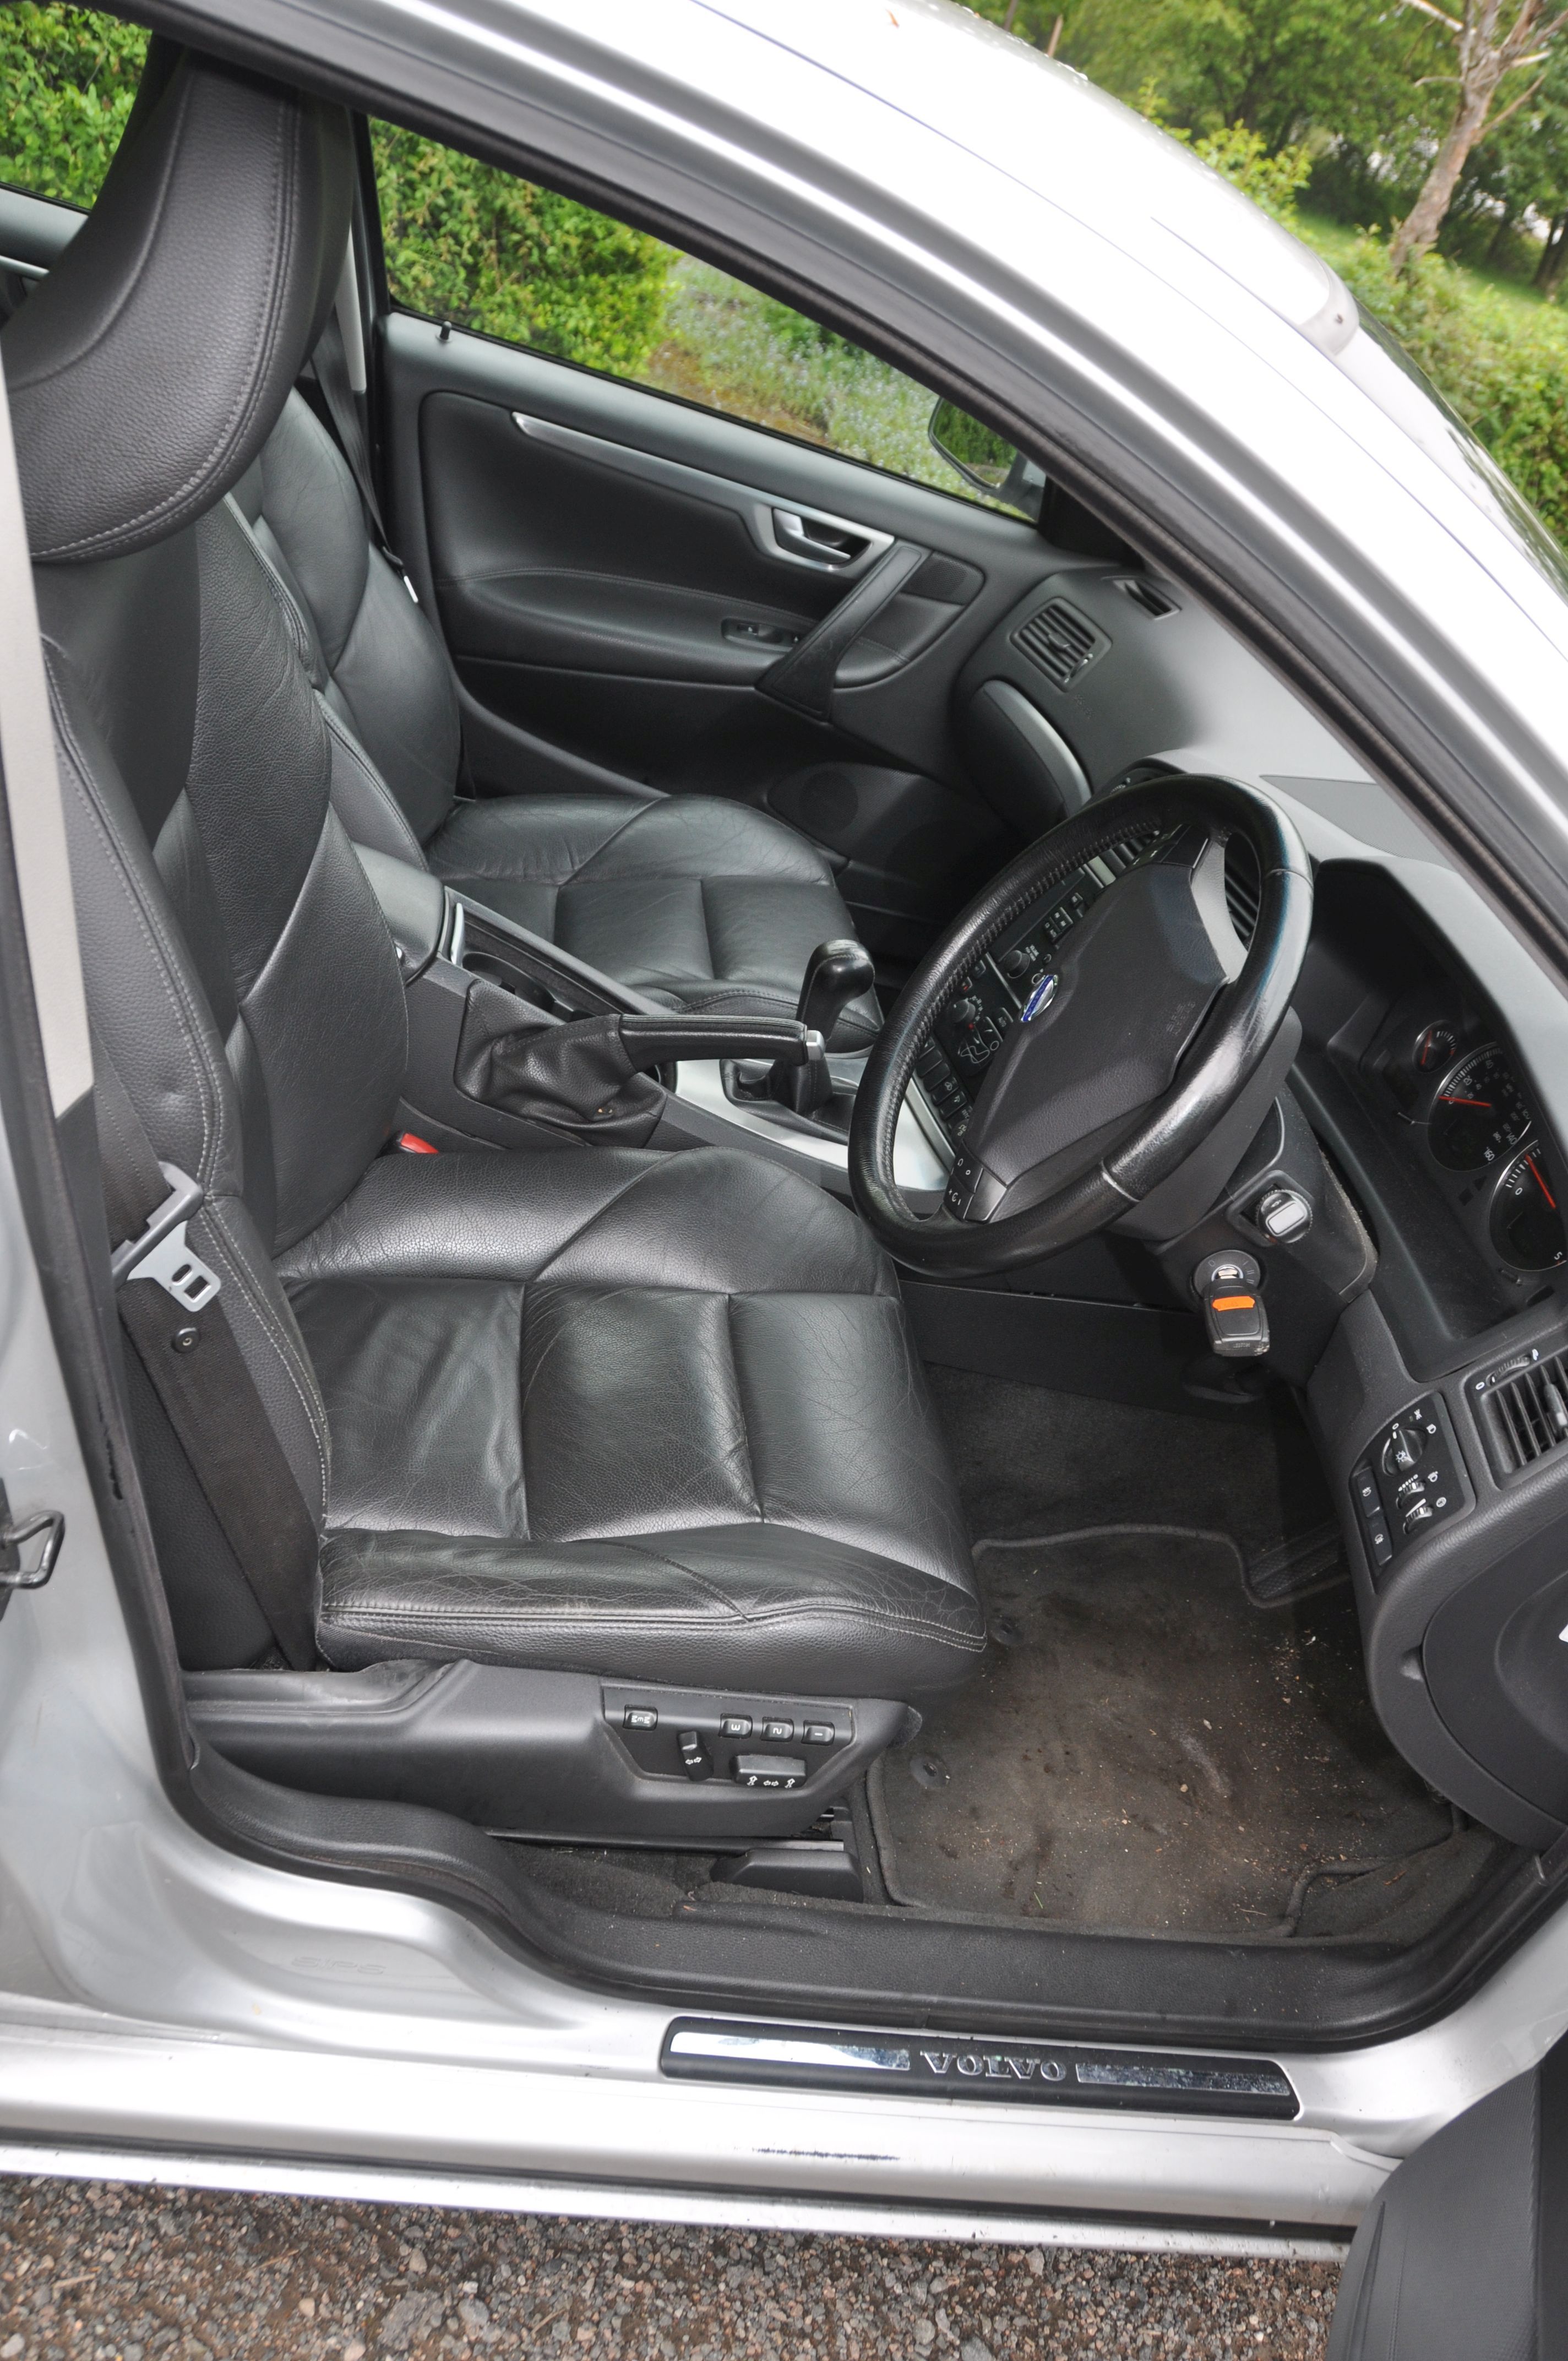 A 2004 VOLVO S60 D5 SE FOUR DOOR SALOON CAR IN SILVER, with a 2401cc diesel engine, 5 speed manual - Image 6 of 16